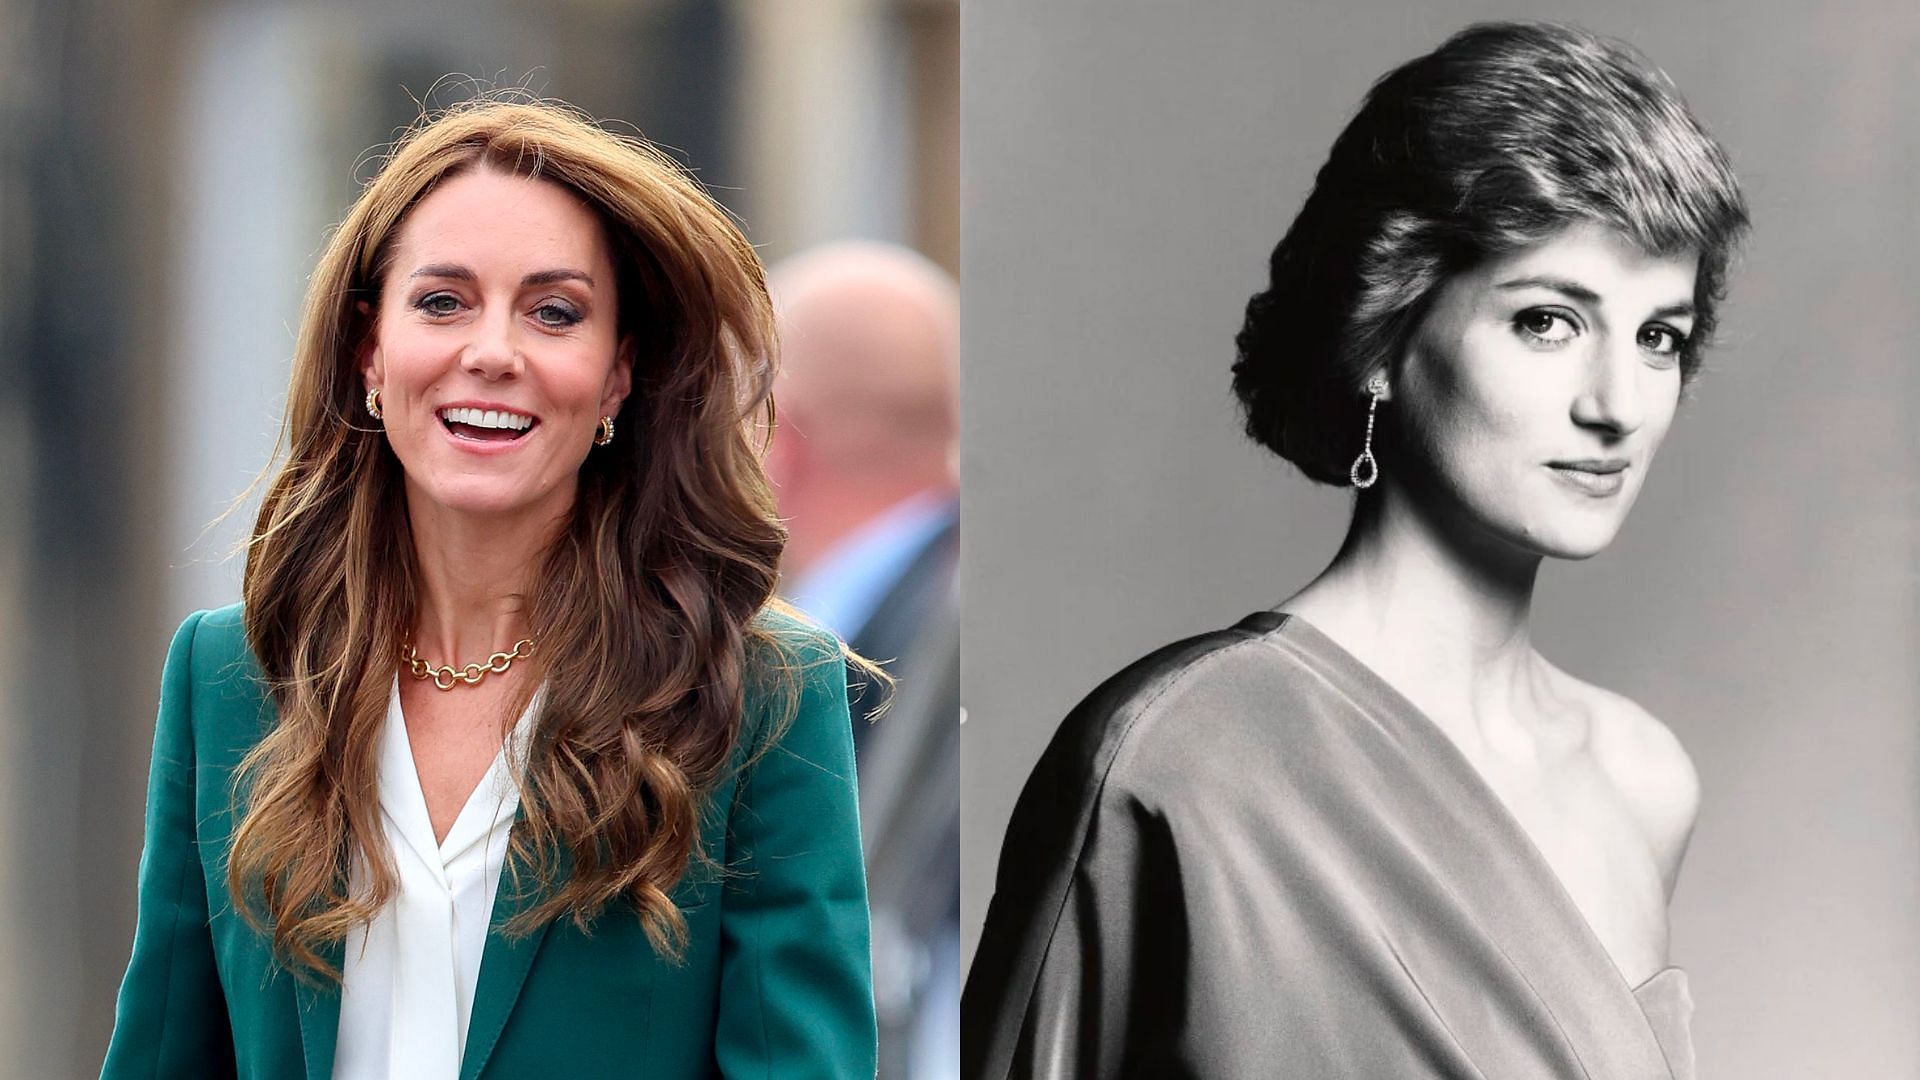 (L) Princess Kate never met (R) Princess Diana in real life (Images via Chris Jackson and National Portrait Gallery)